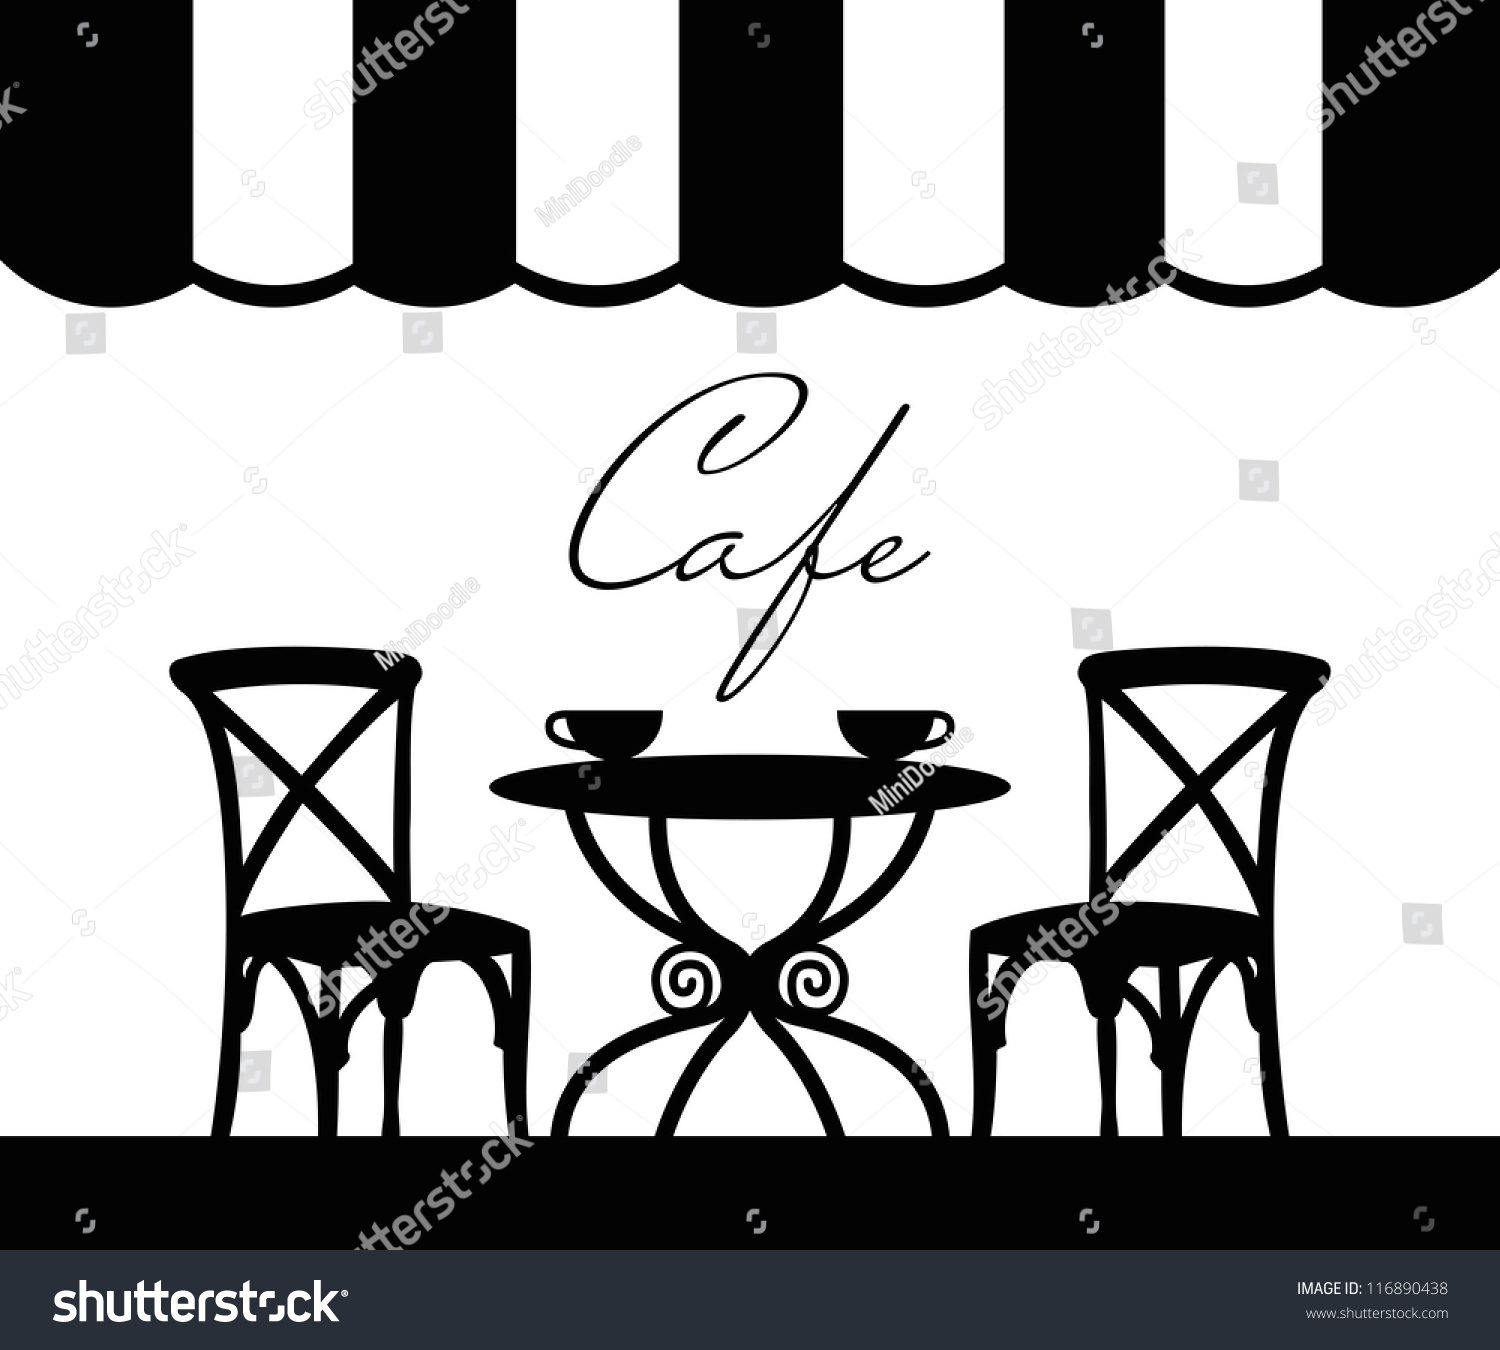 shop clipart black and white - photo #20